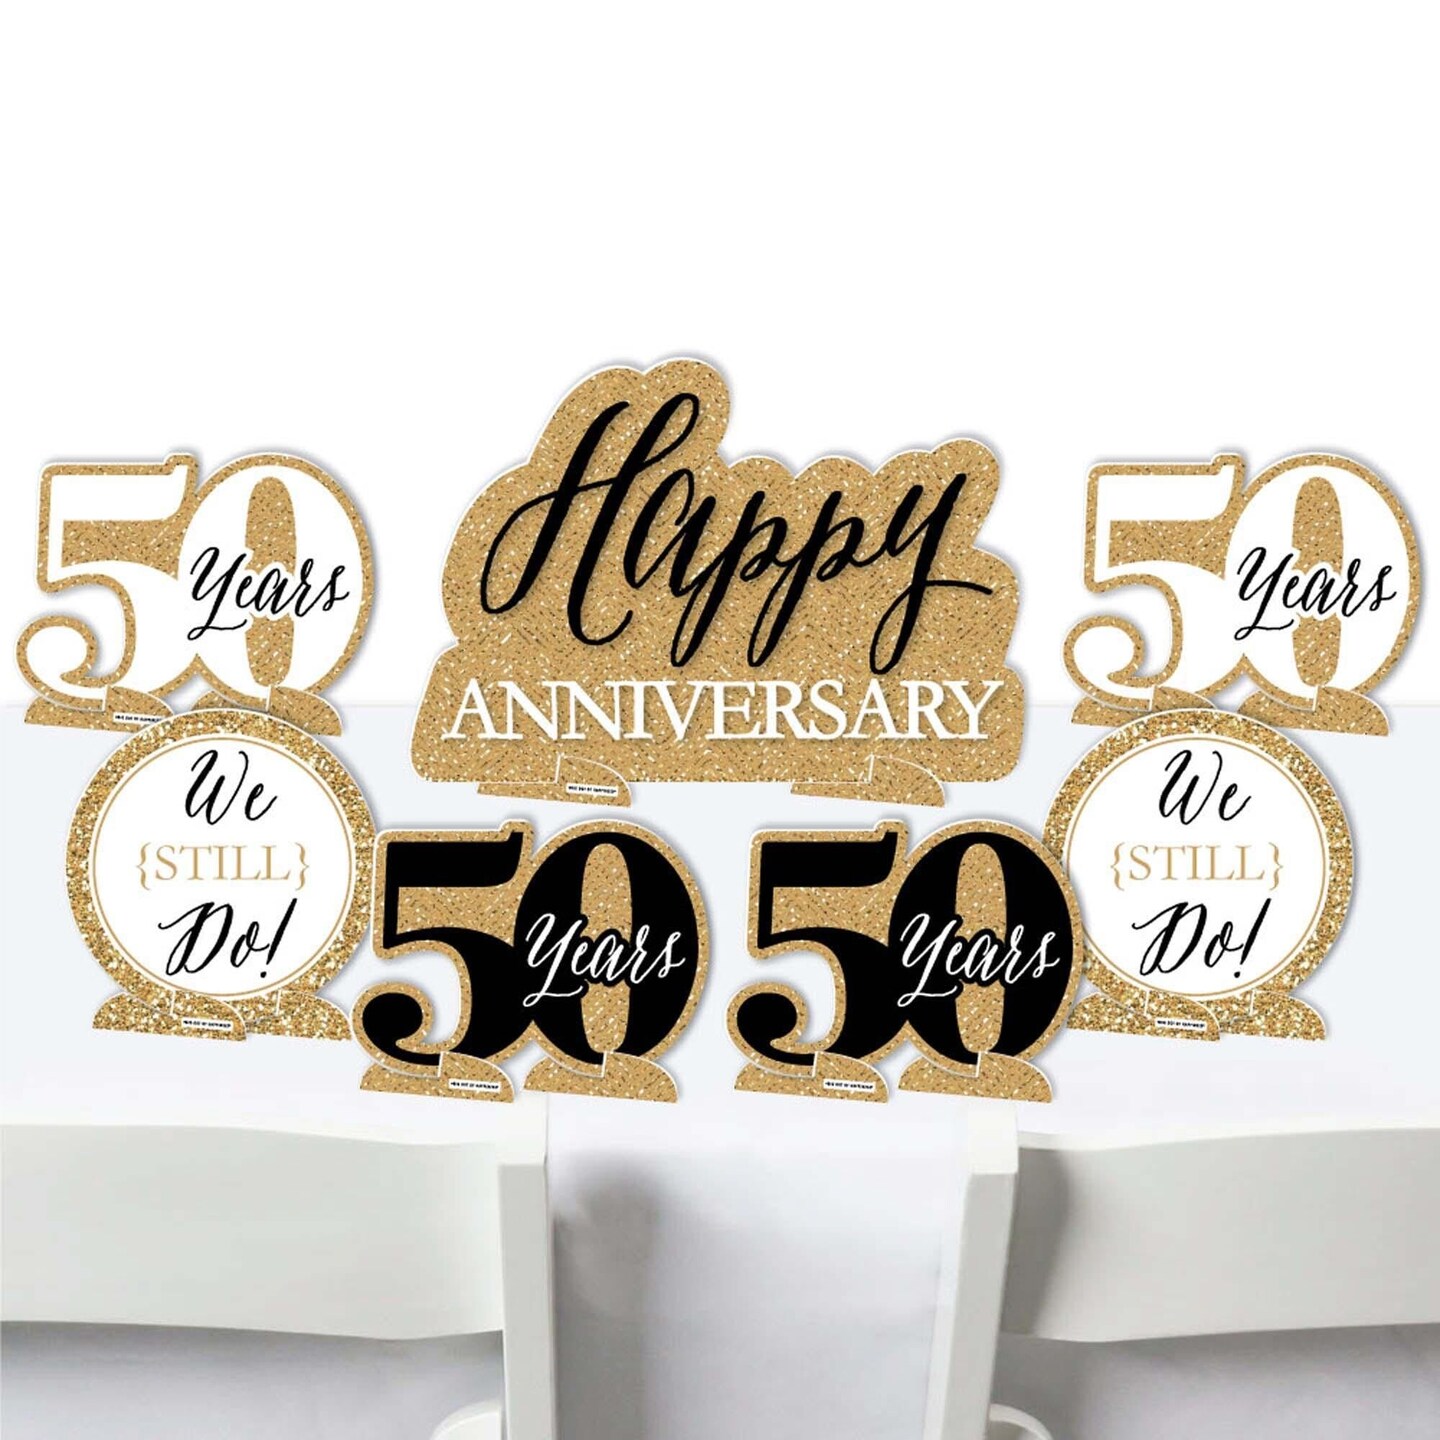 Big Dot of Happiness We Still Do - 50th Wedding Anniversary - Anniversary Party Centerpiece Table Decorations - Tabletop Standups - 7 Pieces